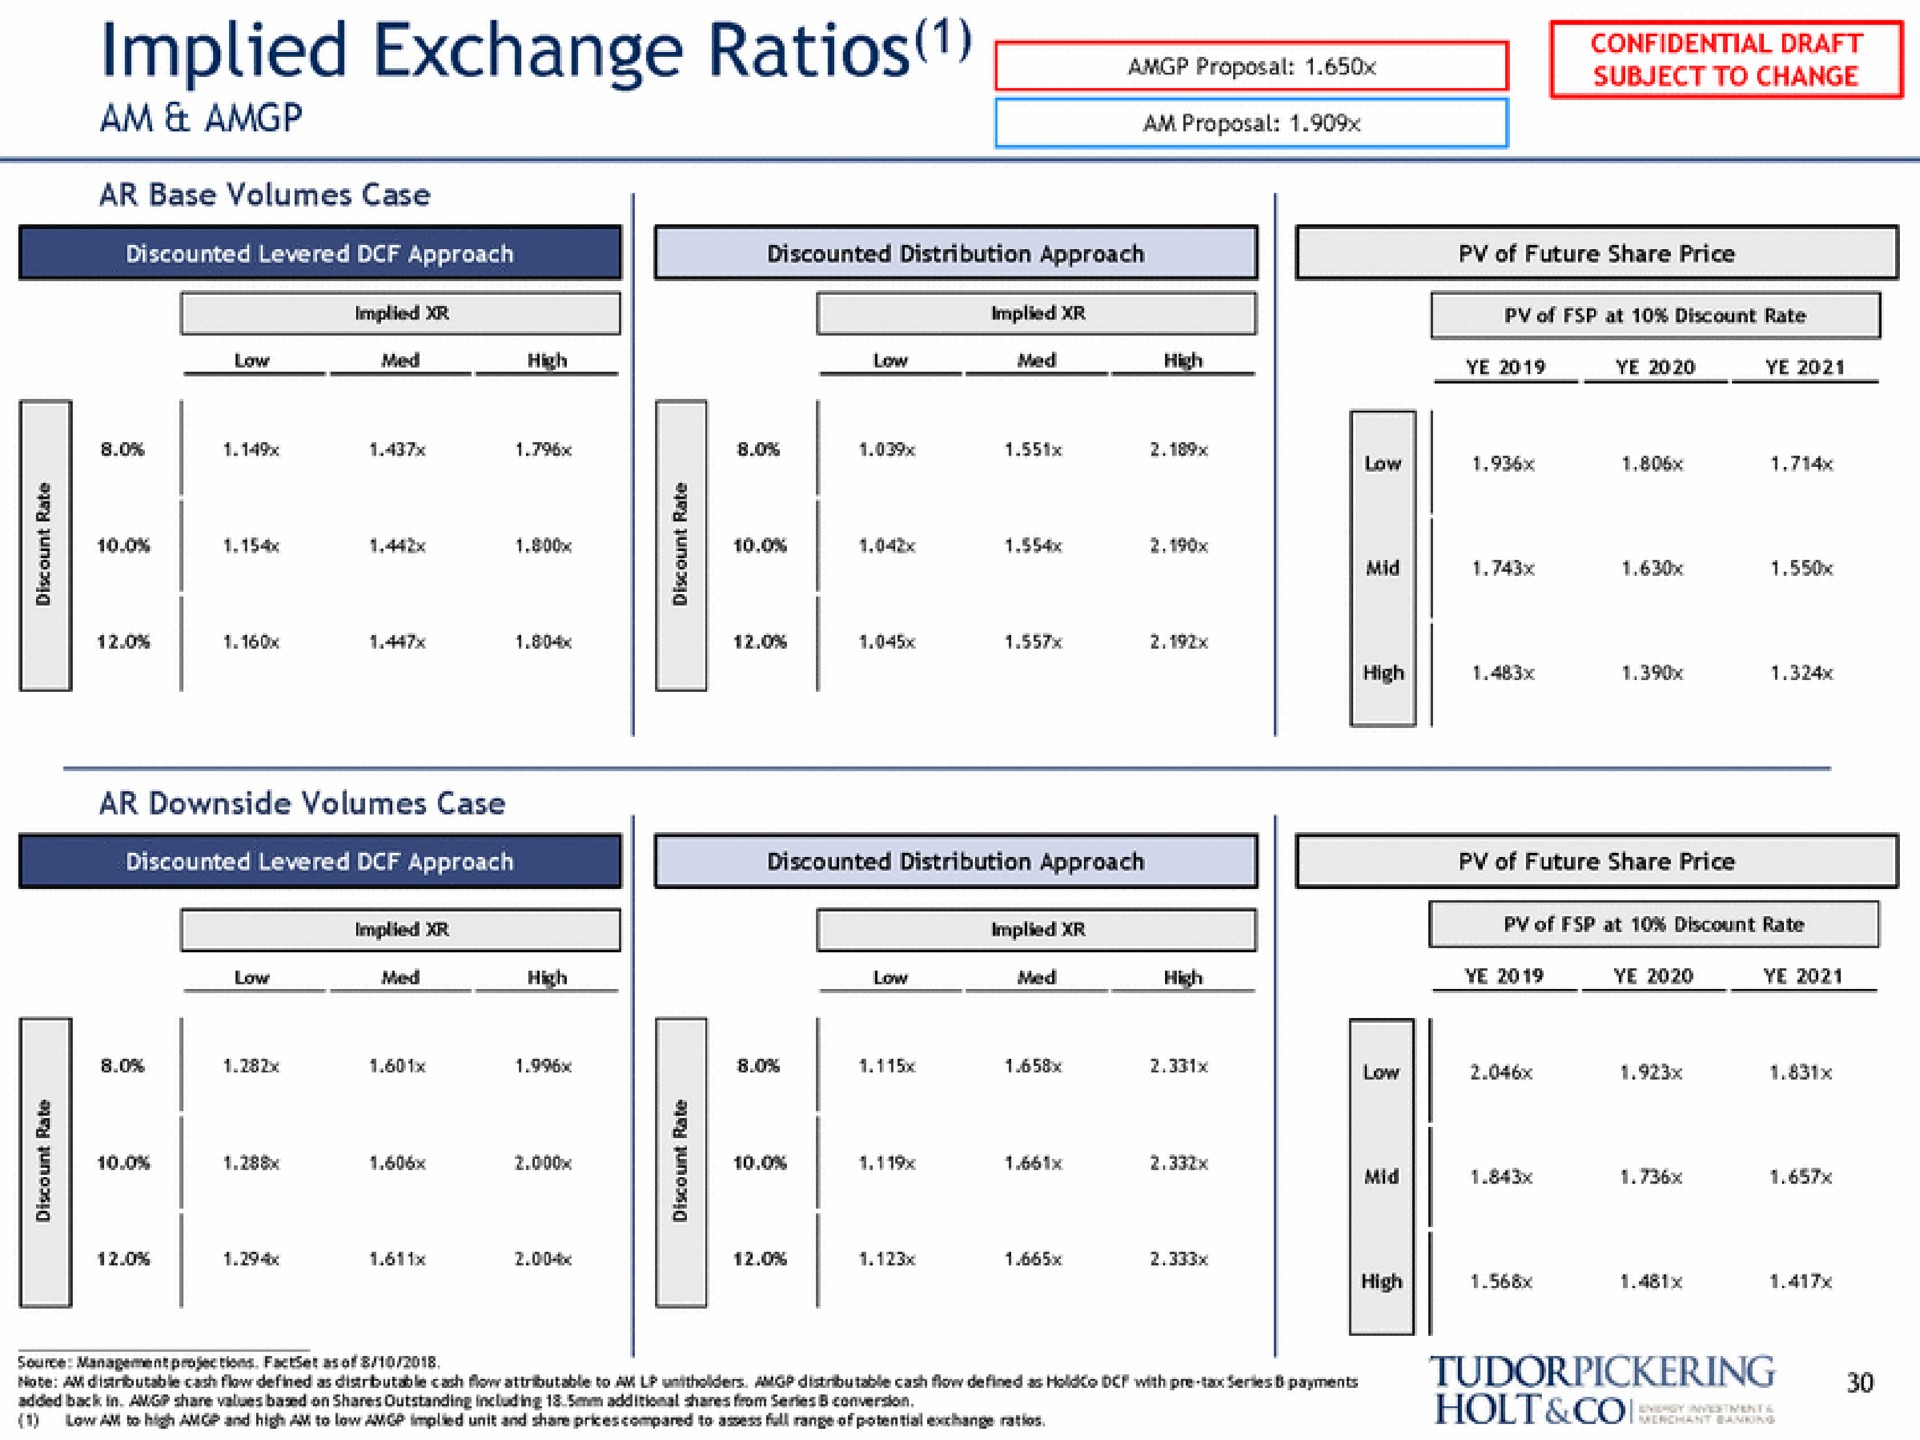 implied exchange ratios am see a fate | Tudor, Pickering, Holt & Co